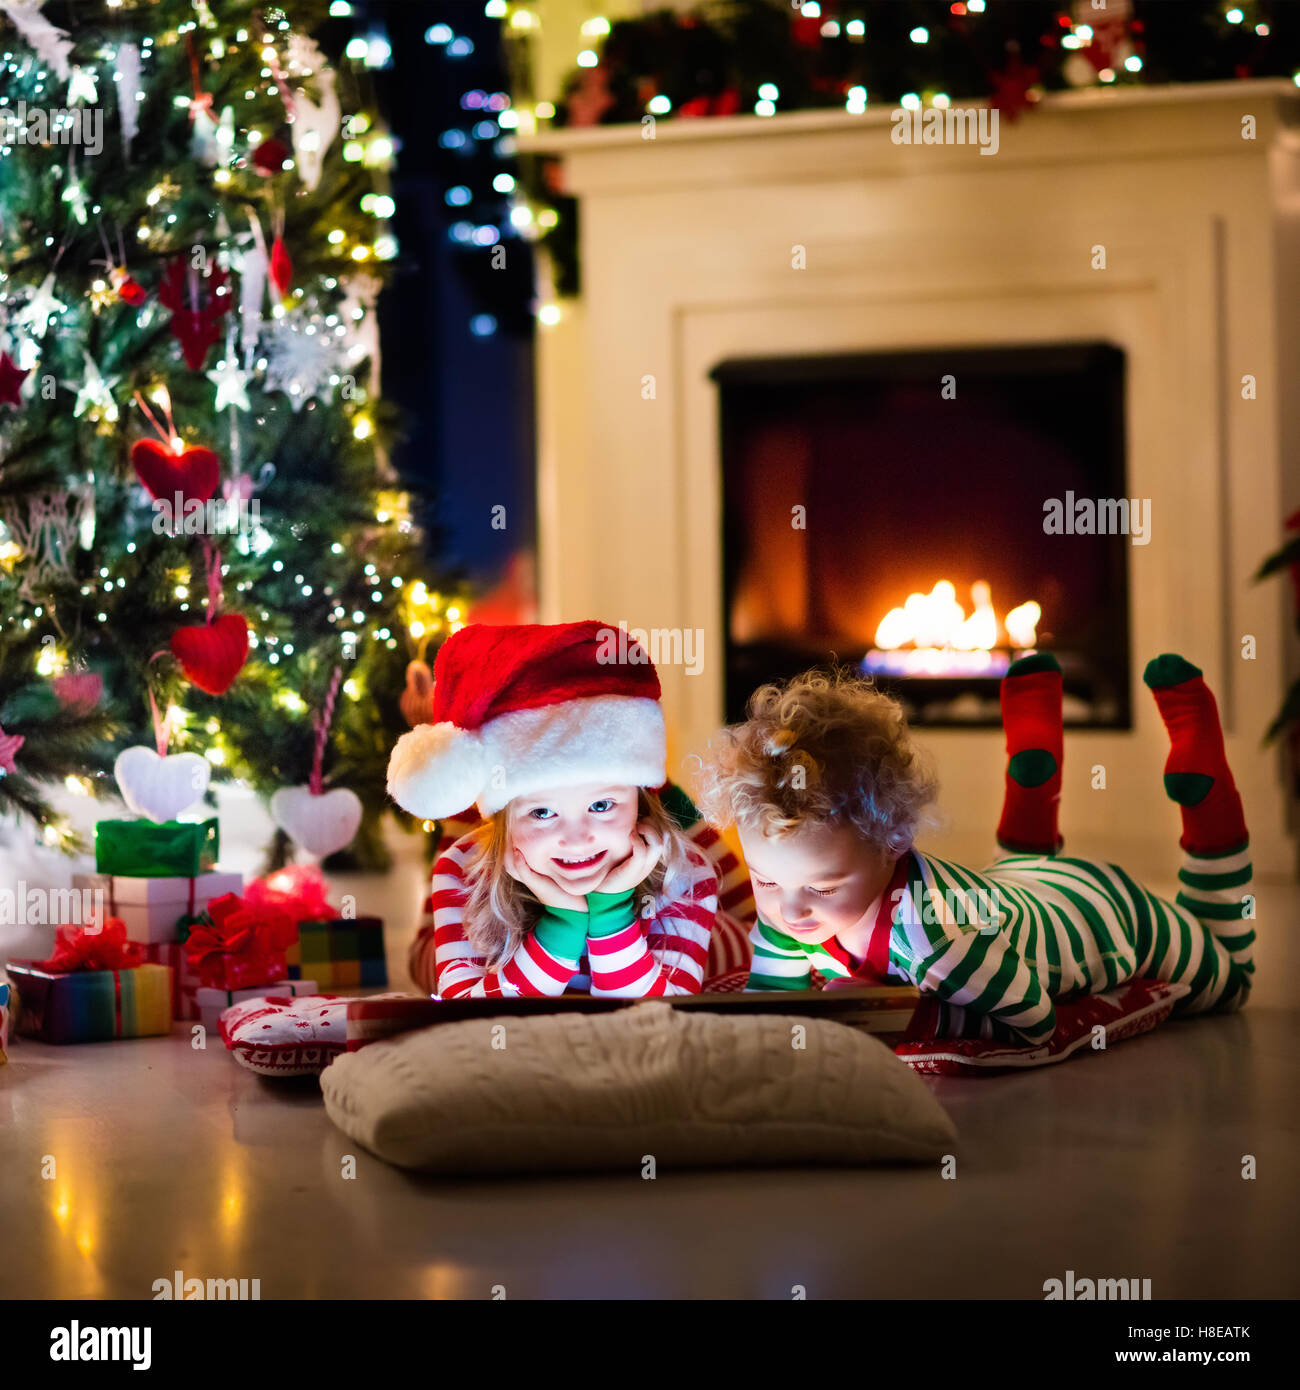 Family on Christmas eve at fireplace. Kids opening Xmas presents. Children under Christmas tree with gift boxes. Stock Photo